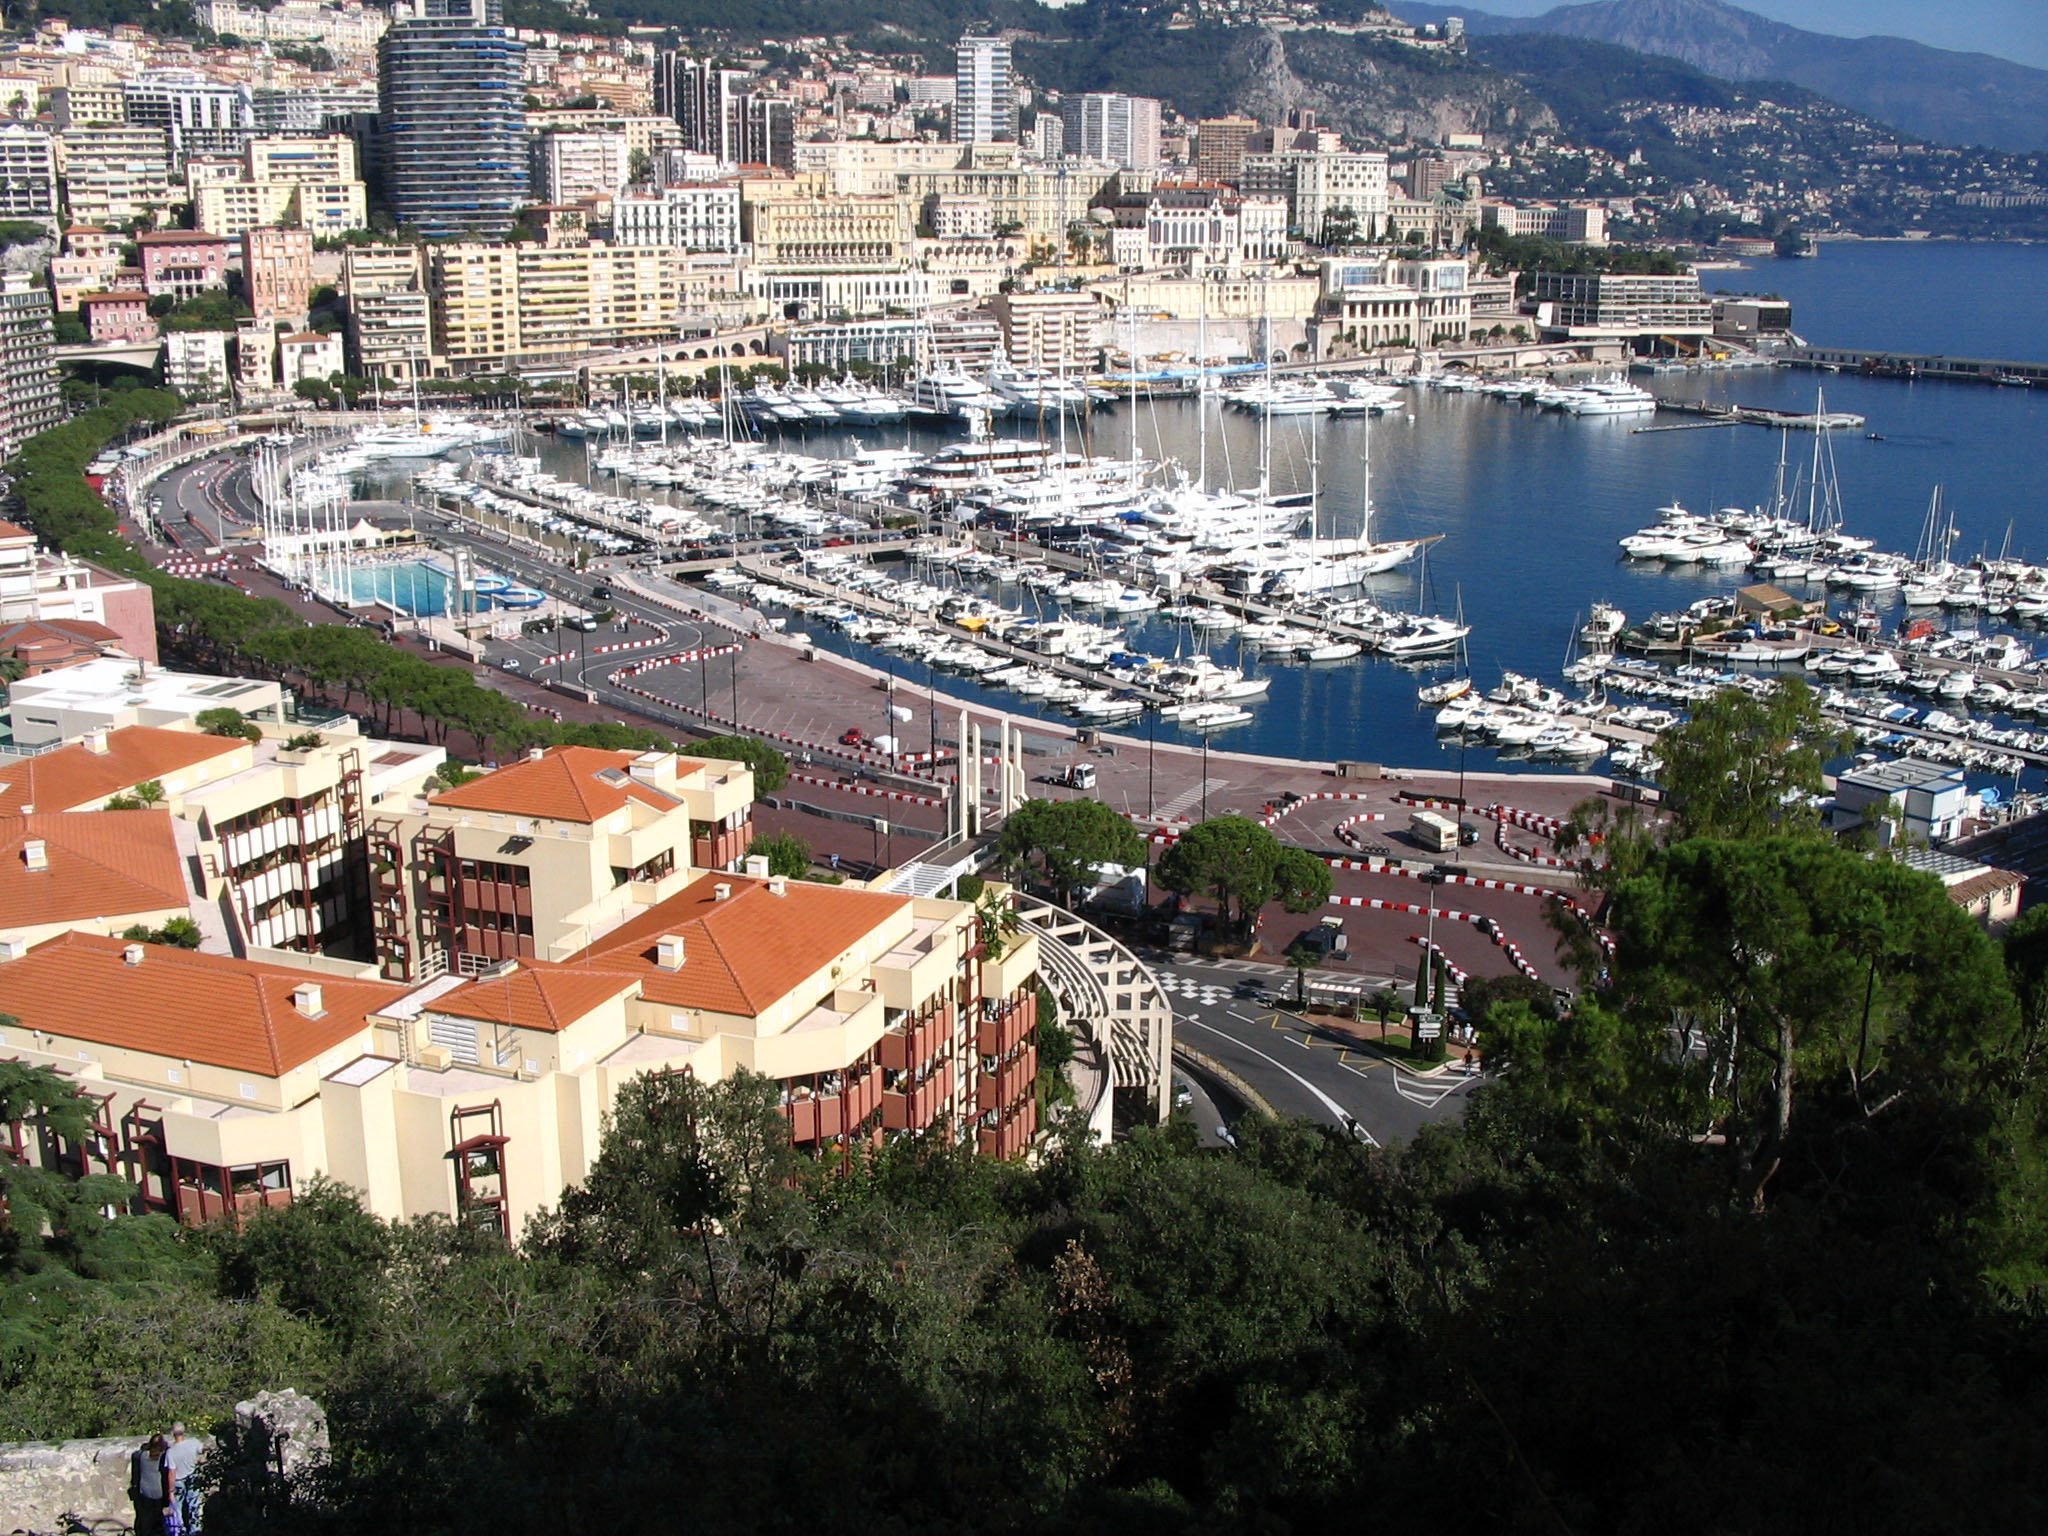 A picturesque view of Monaco